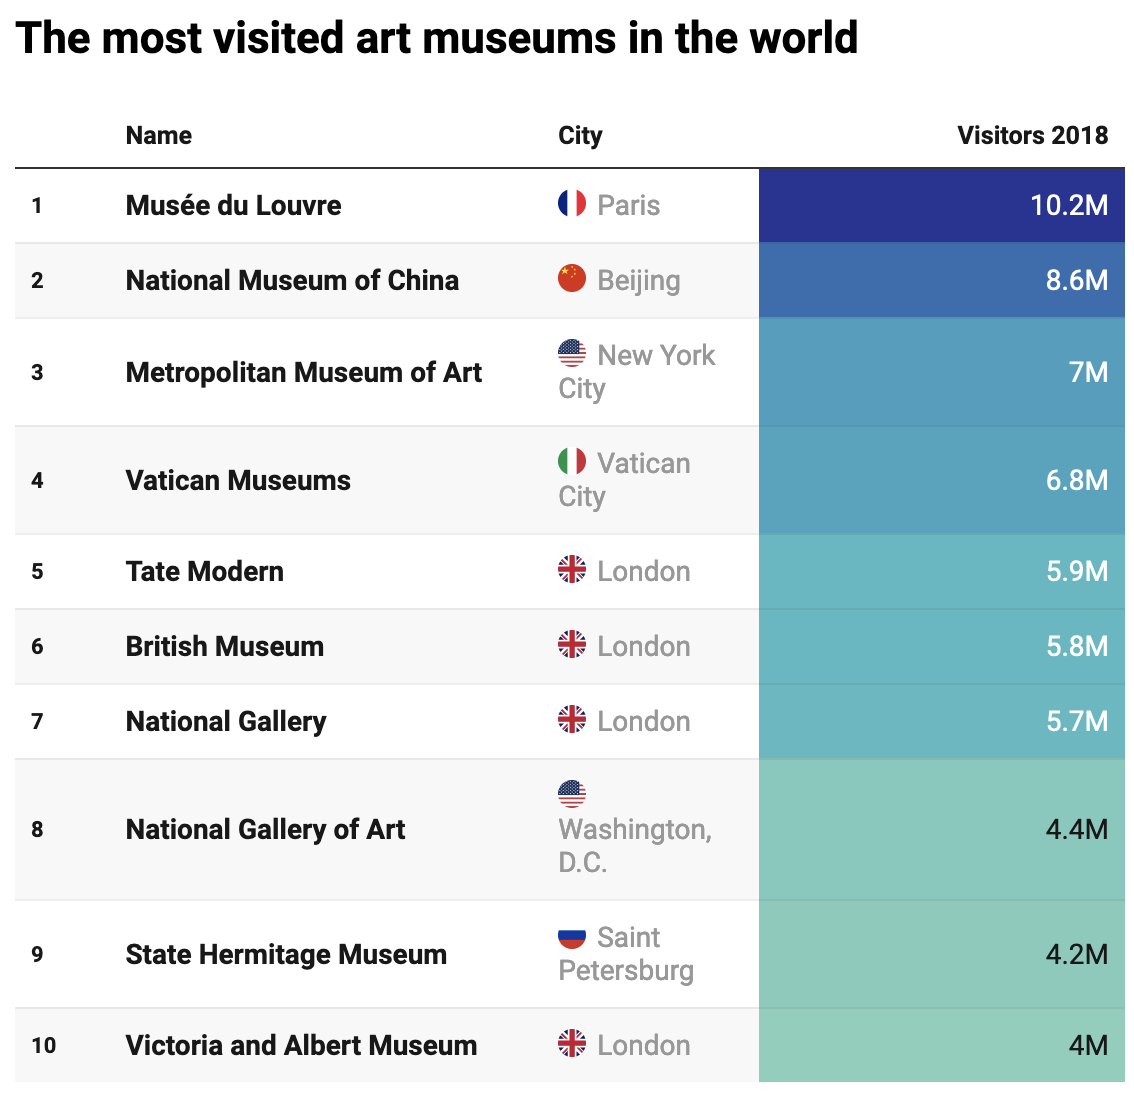 A list of the most visited museums in the world, with the column with the number of visitors coloured according the the values